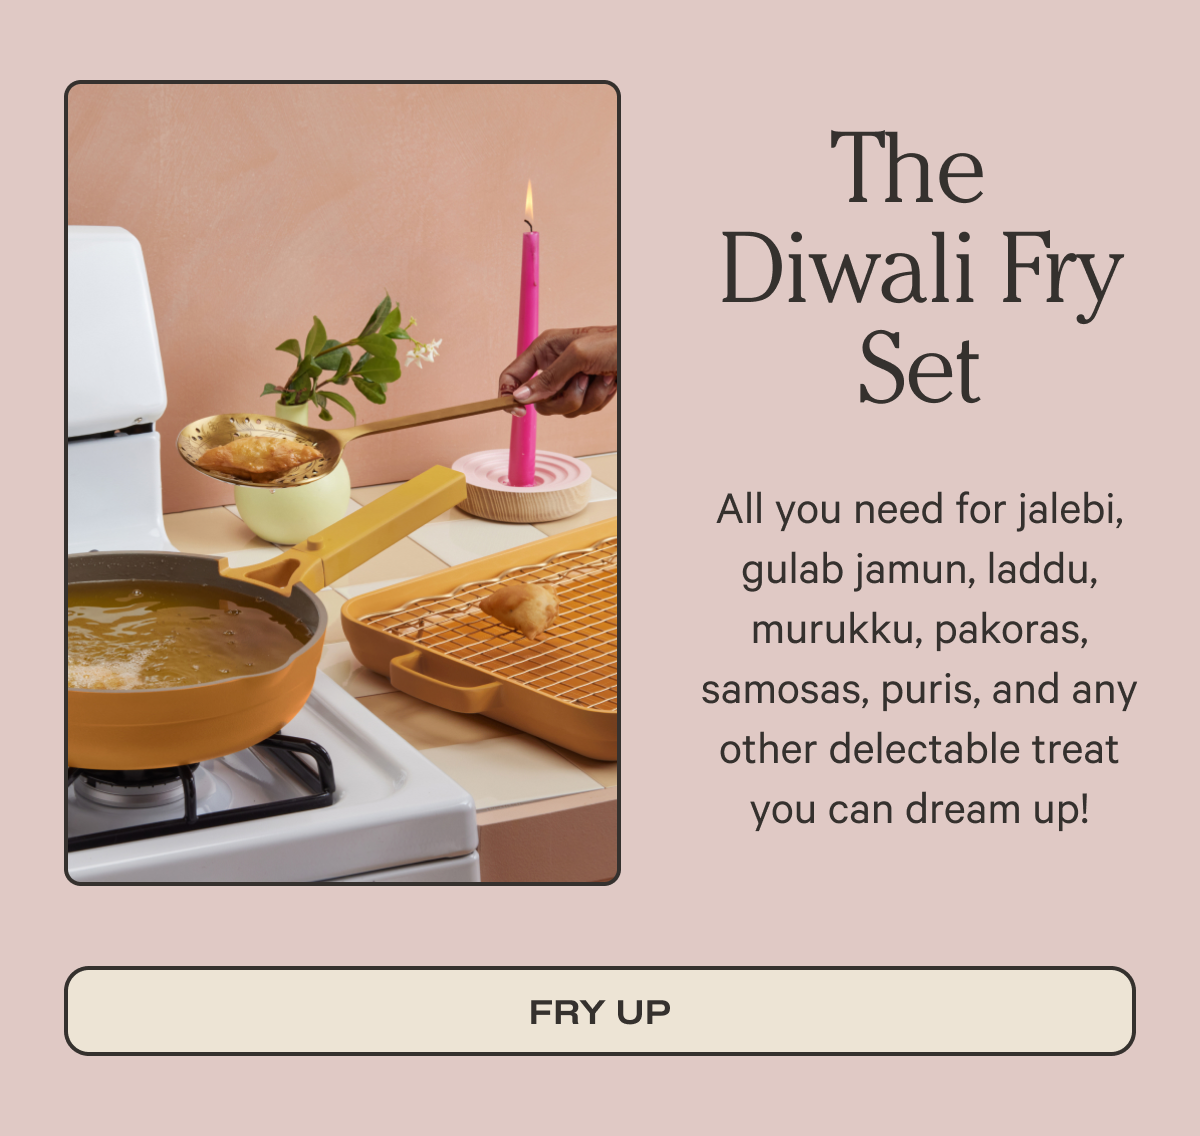 The Diwali Fry Set All you need for jalebi, gulab jamun, laddu, murukku, pakoras, samosas, puris, and any other delectable treat you can dream up! | Fry It Up